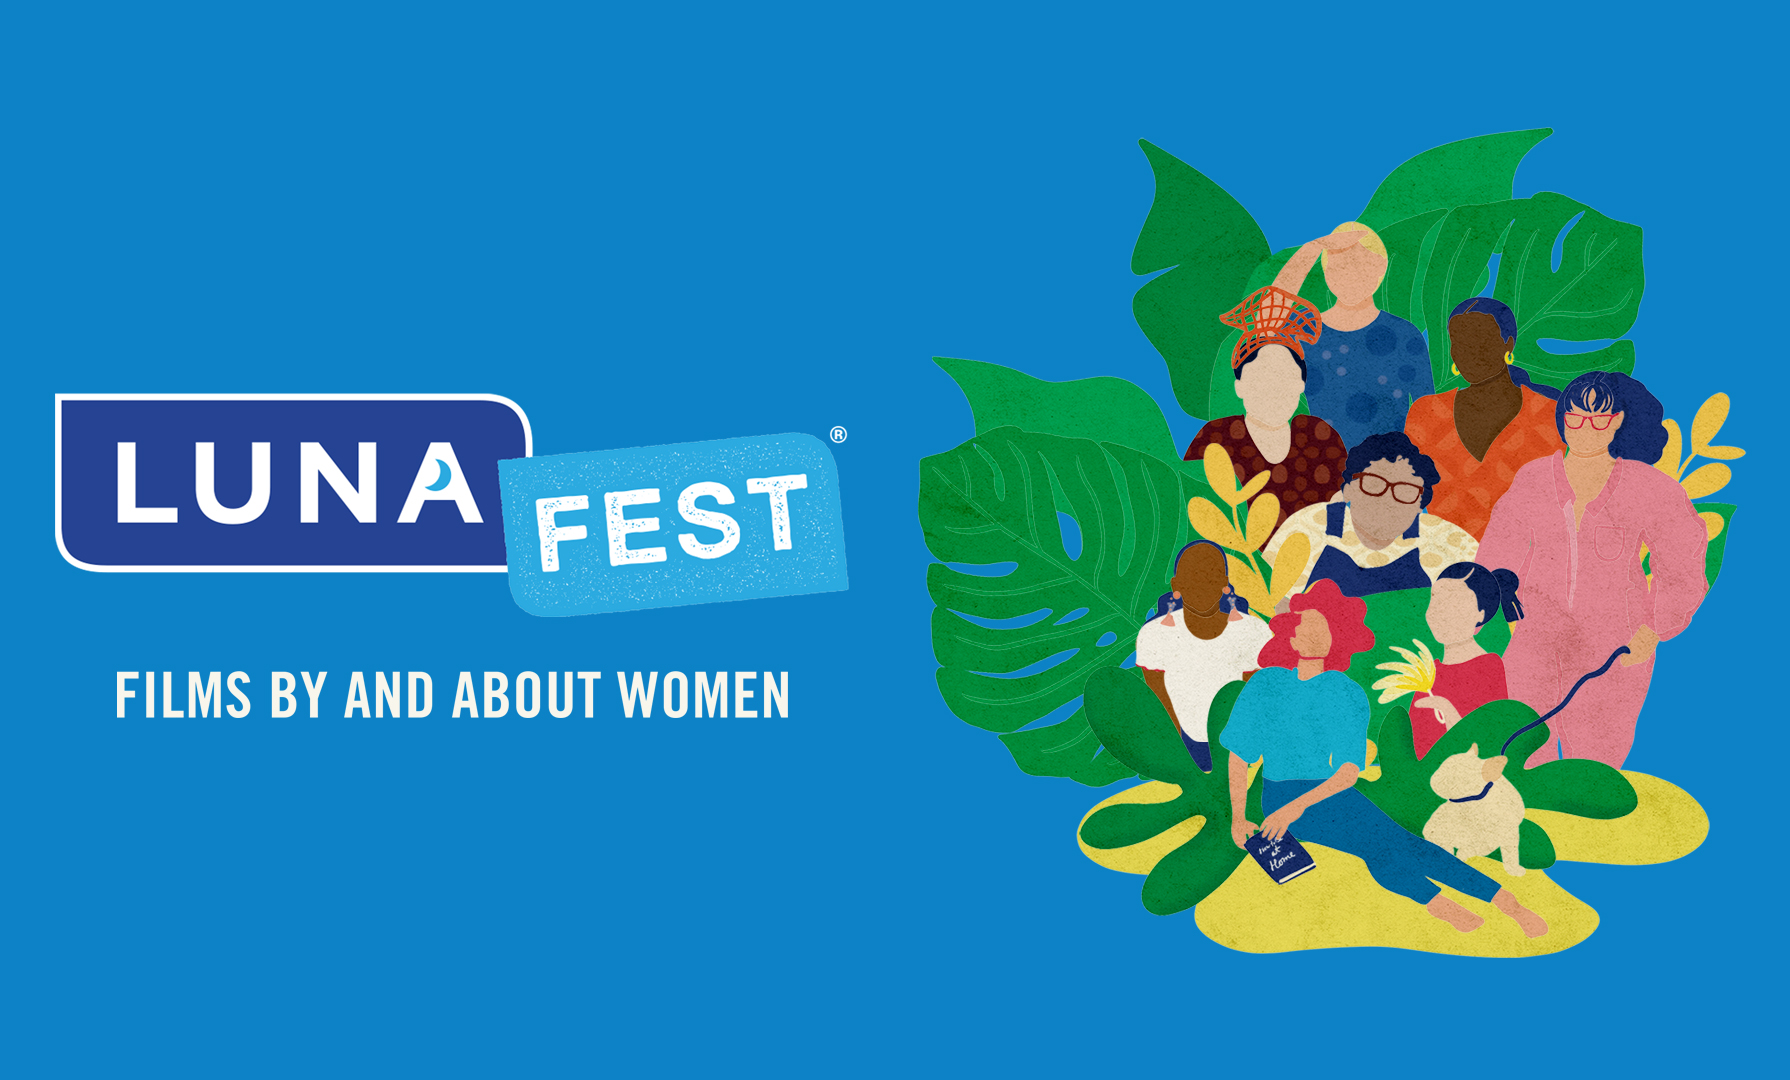 LUNAFEST: FILMS BY AND ABOUT WOMEN